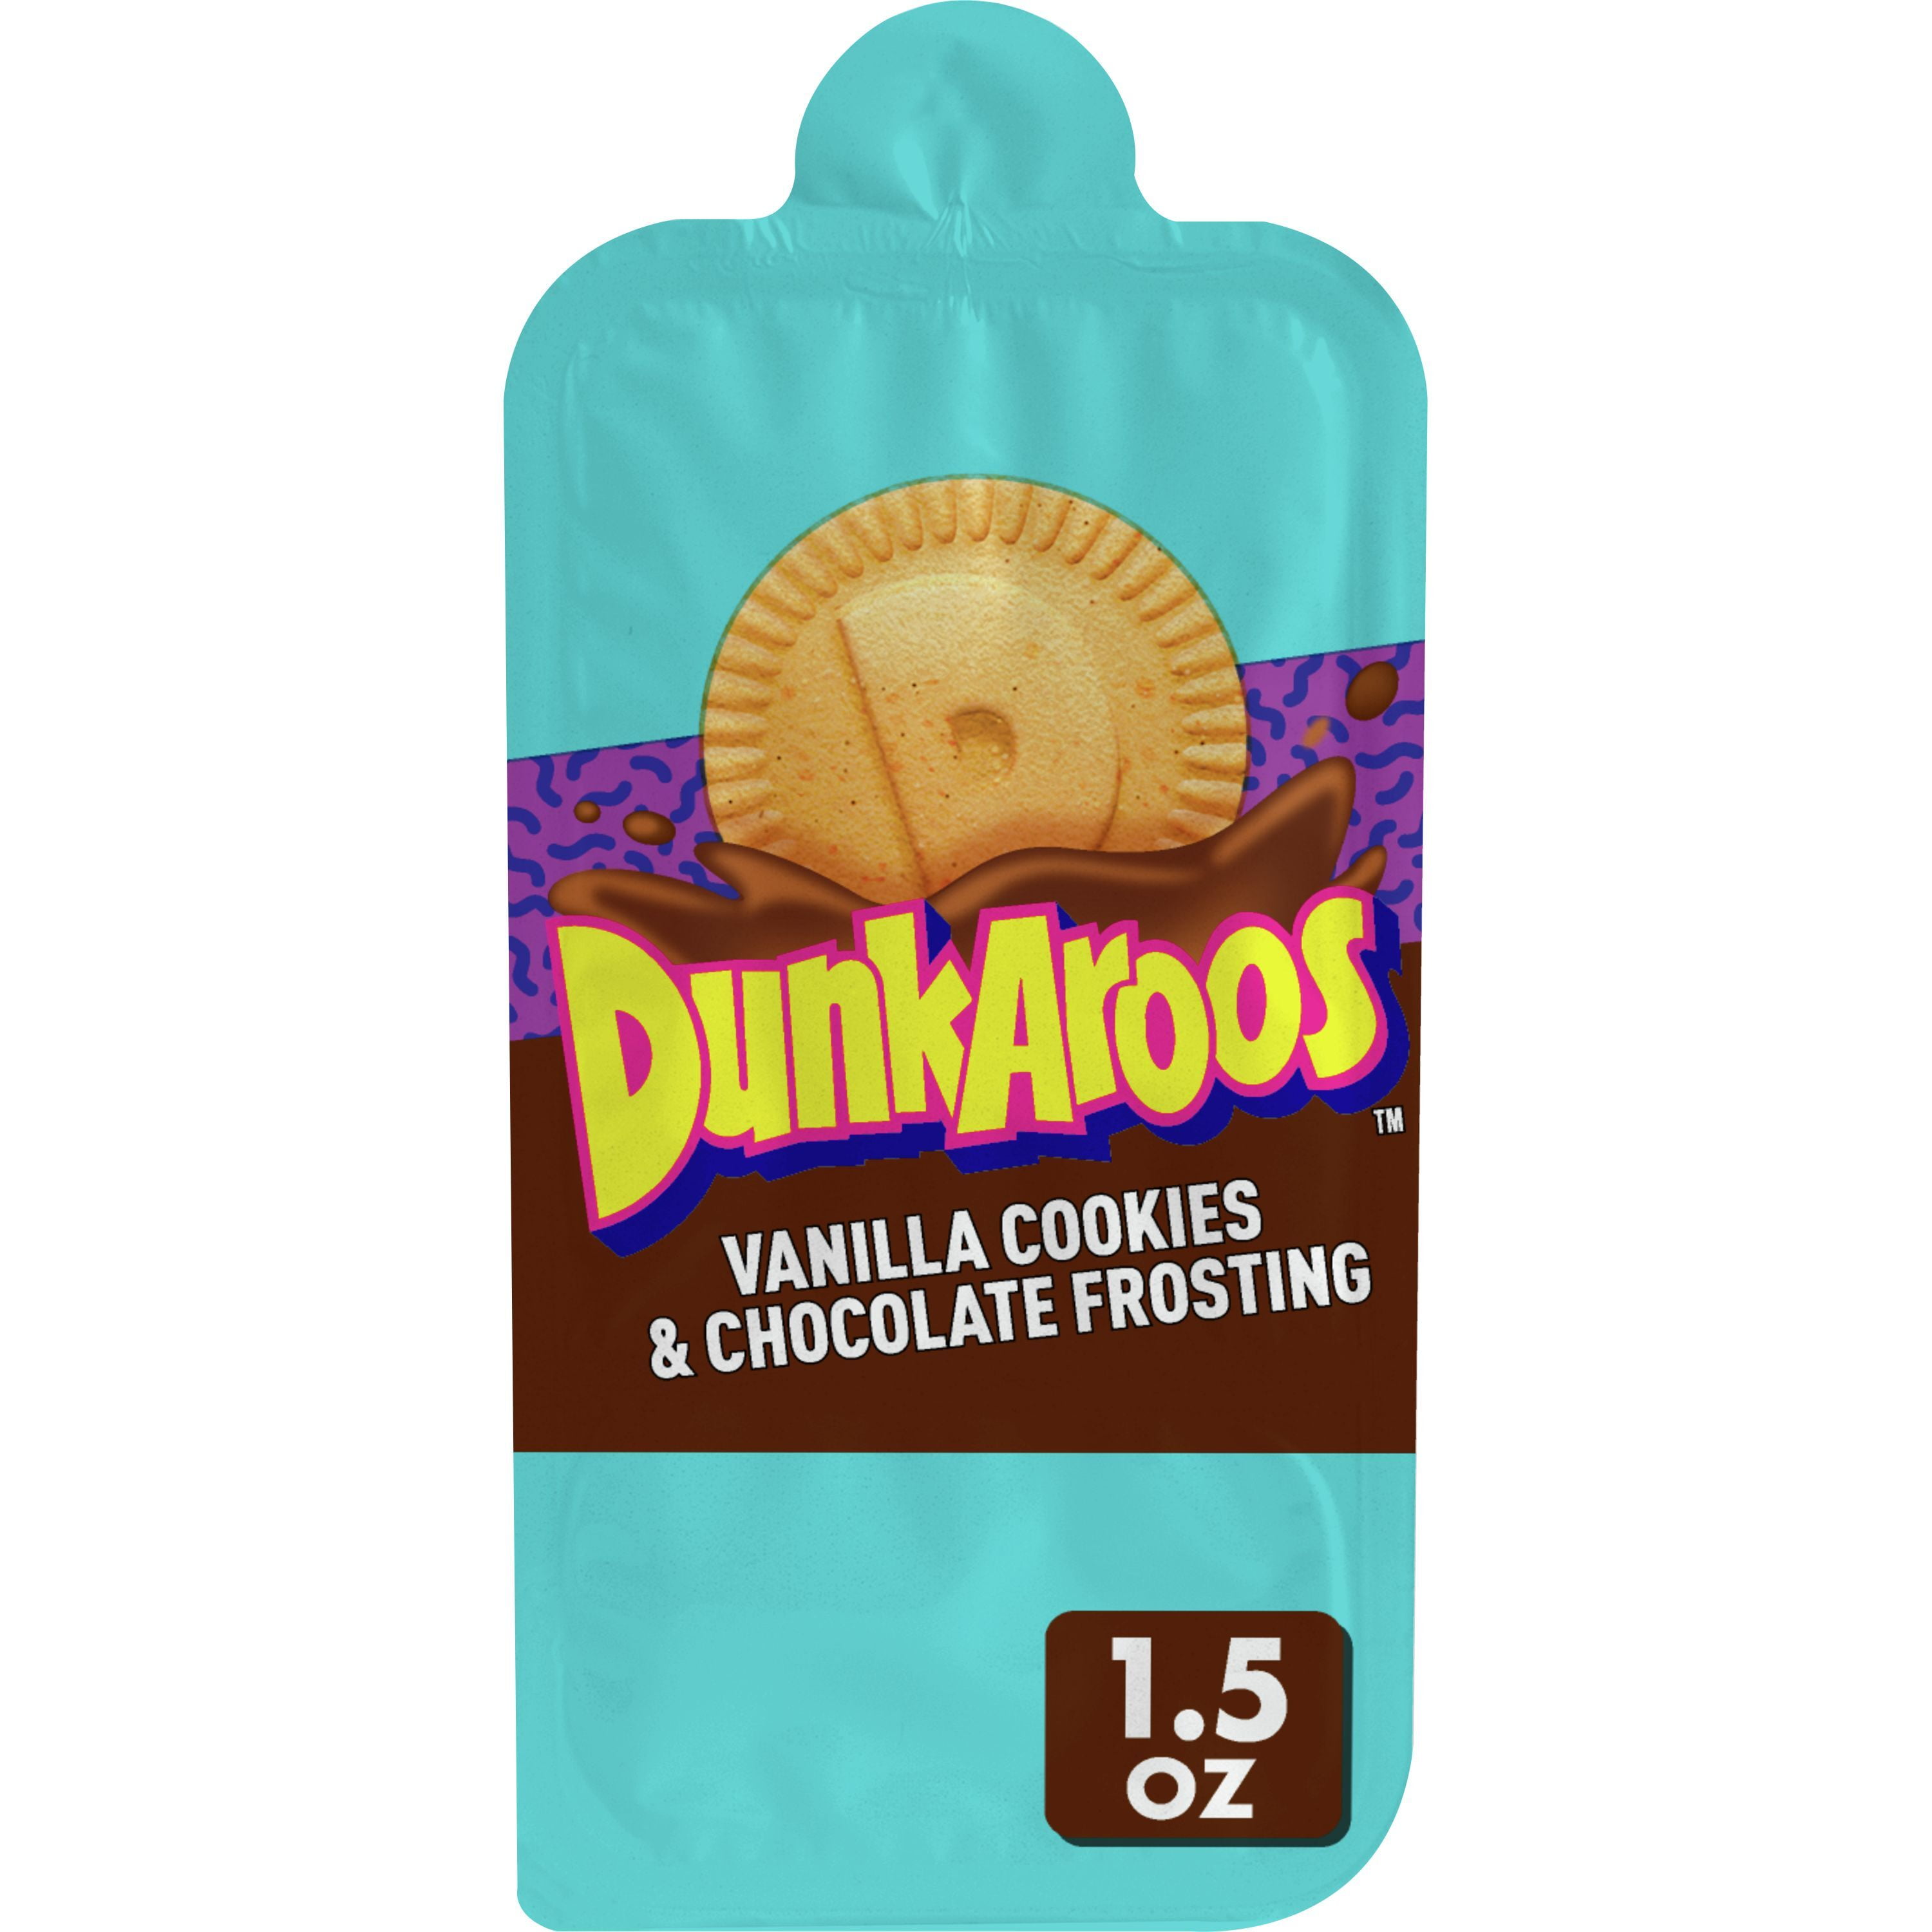 Dunkaroos Vanilla Cookies and Chocolate Frosting, 1.5 oz